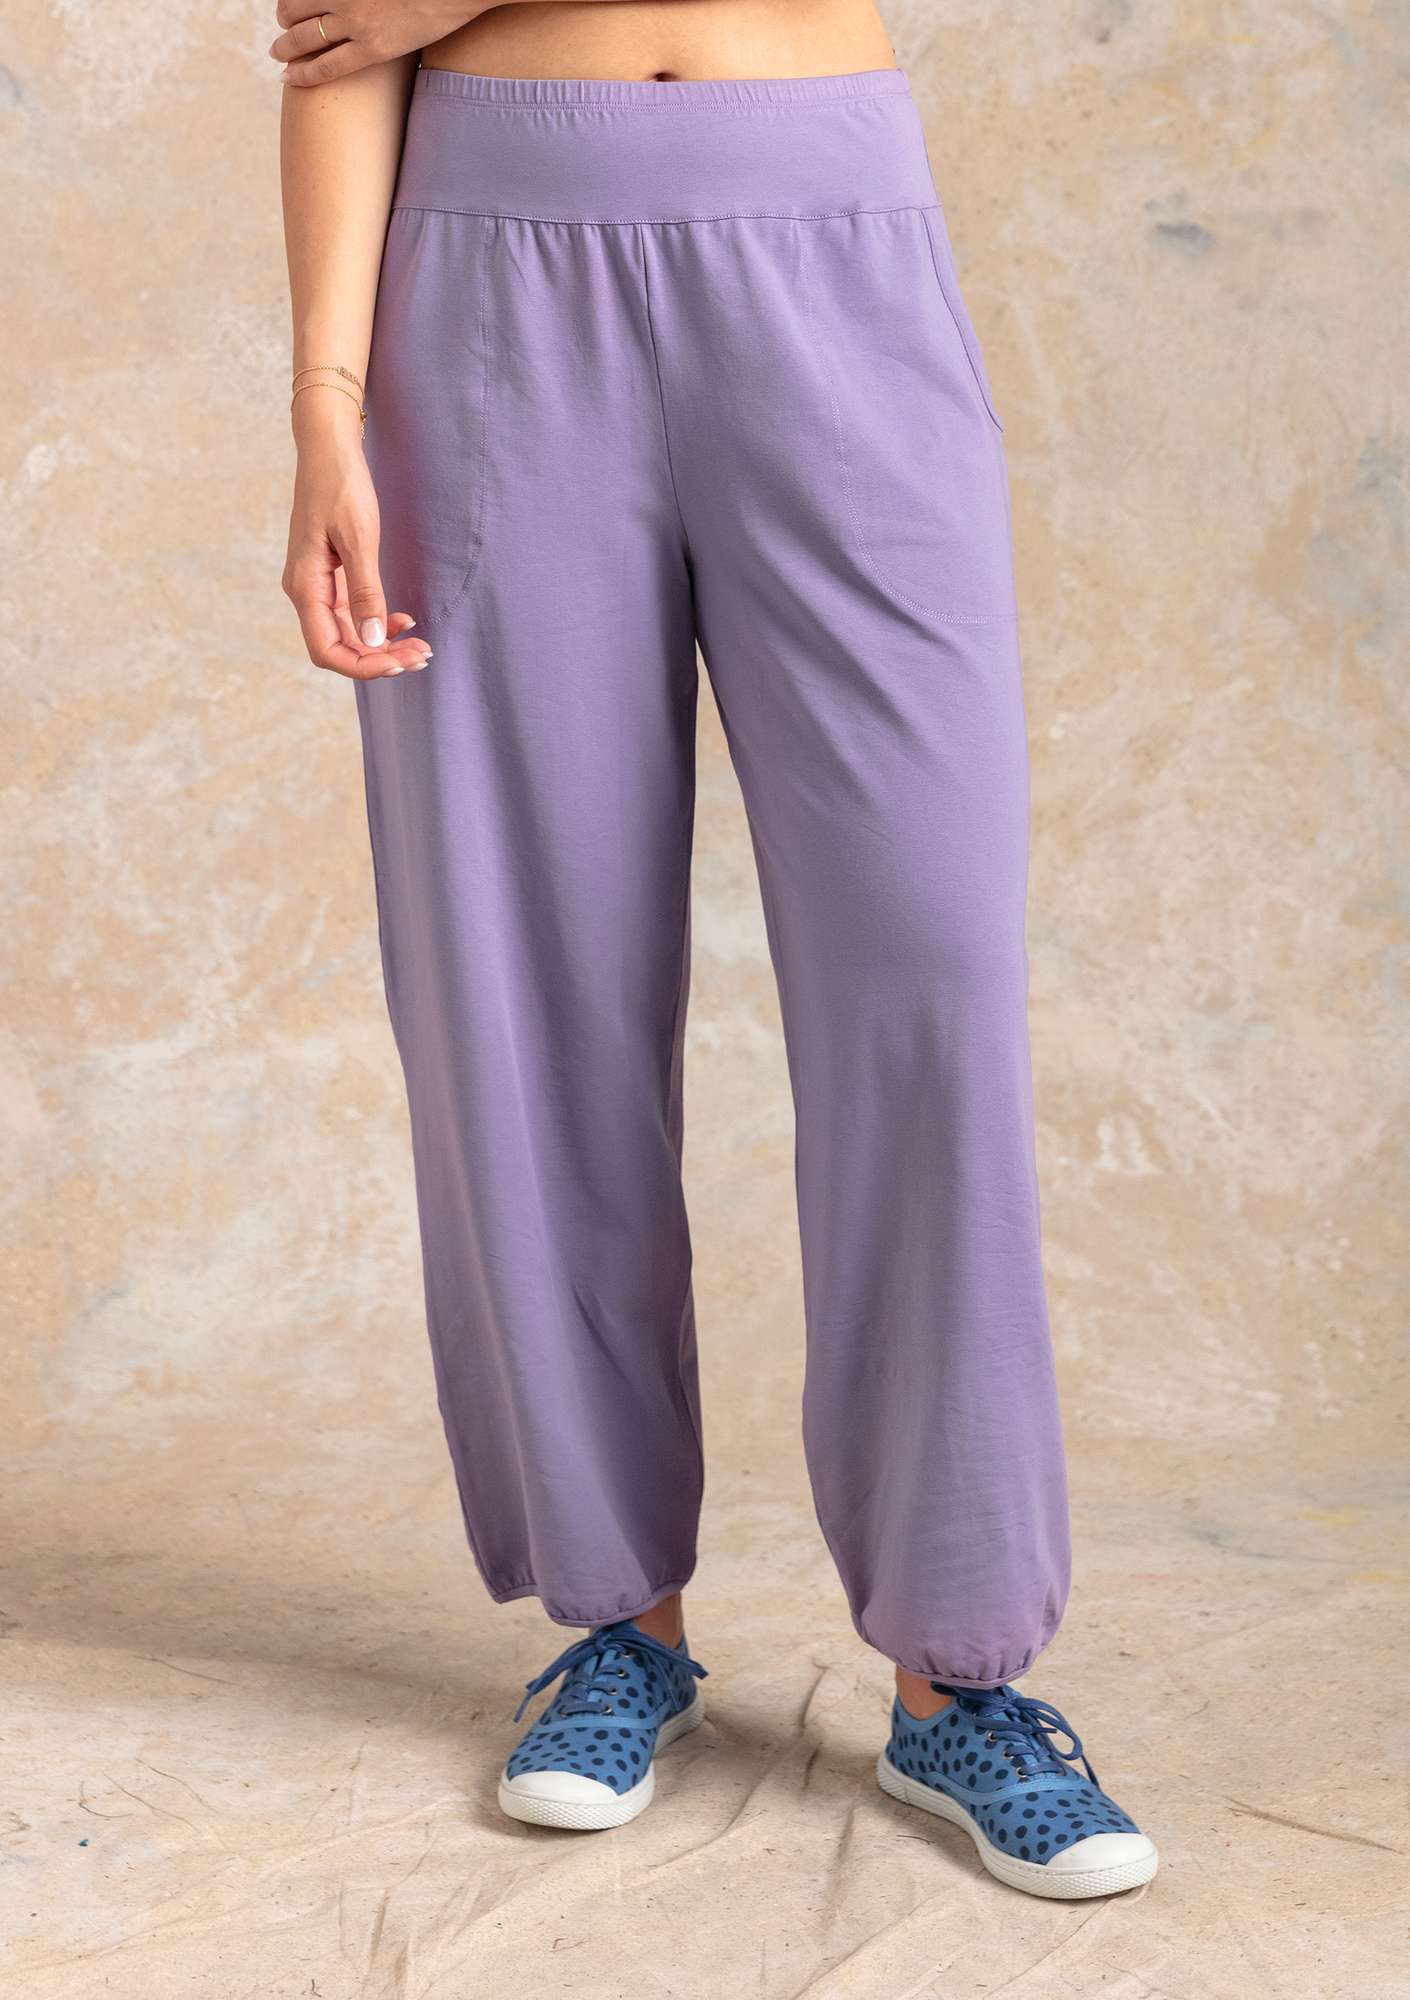 Solid-colored jersey pants hyacinth